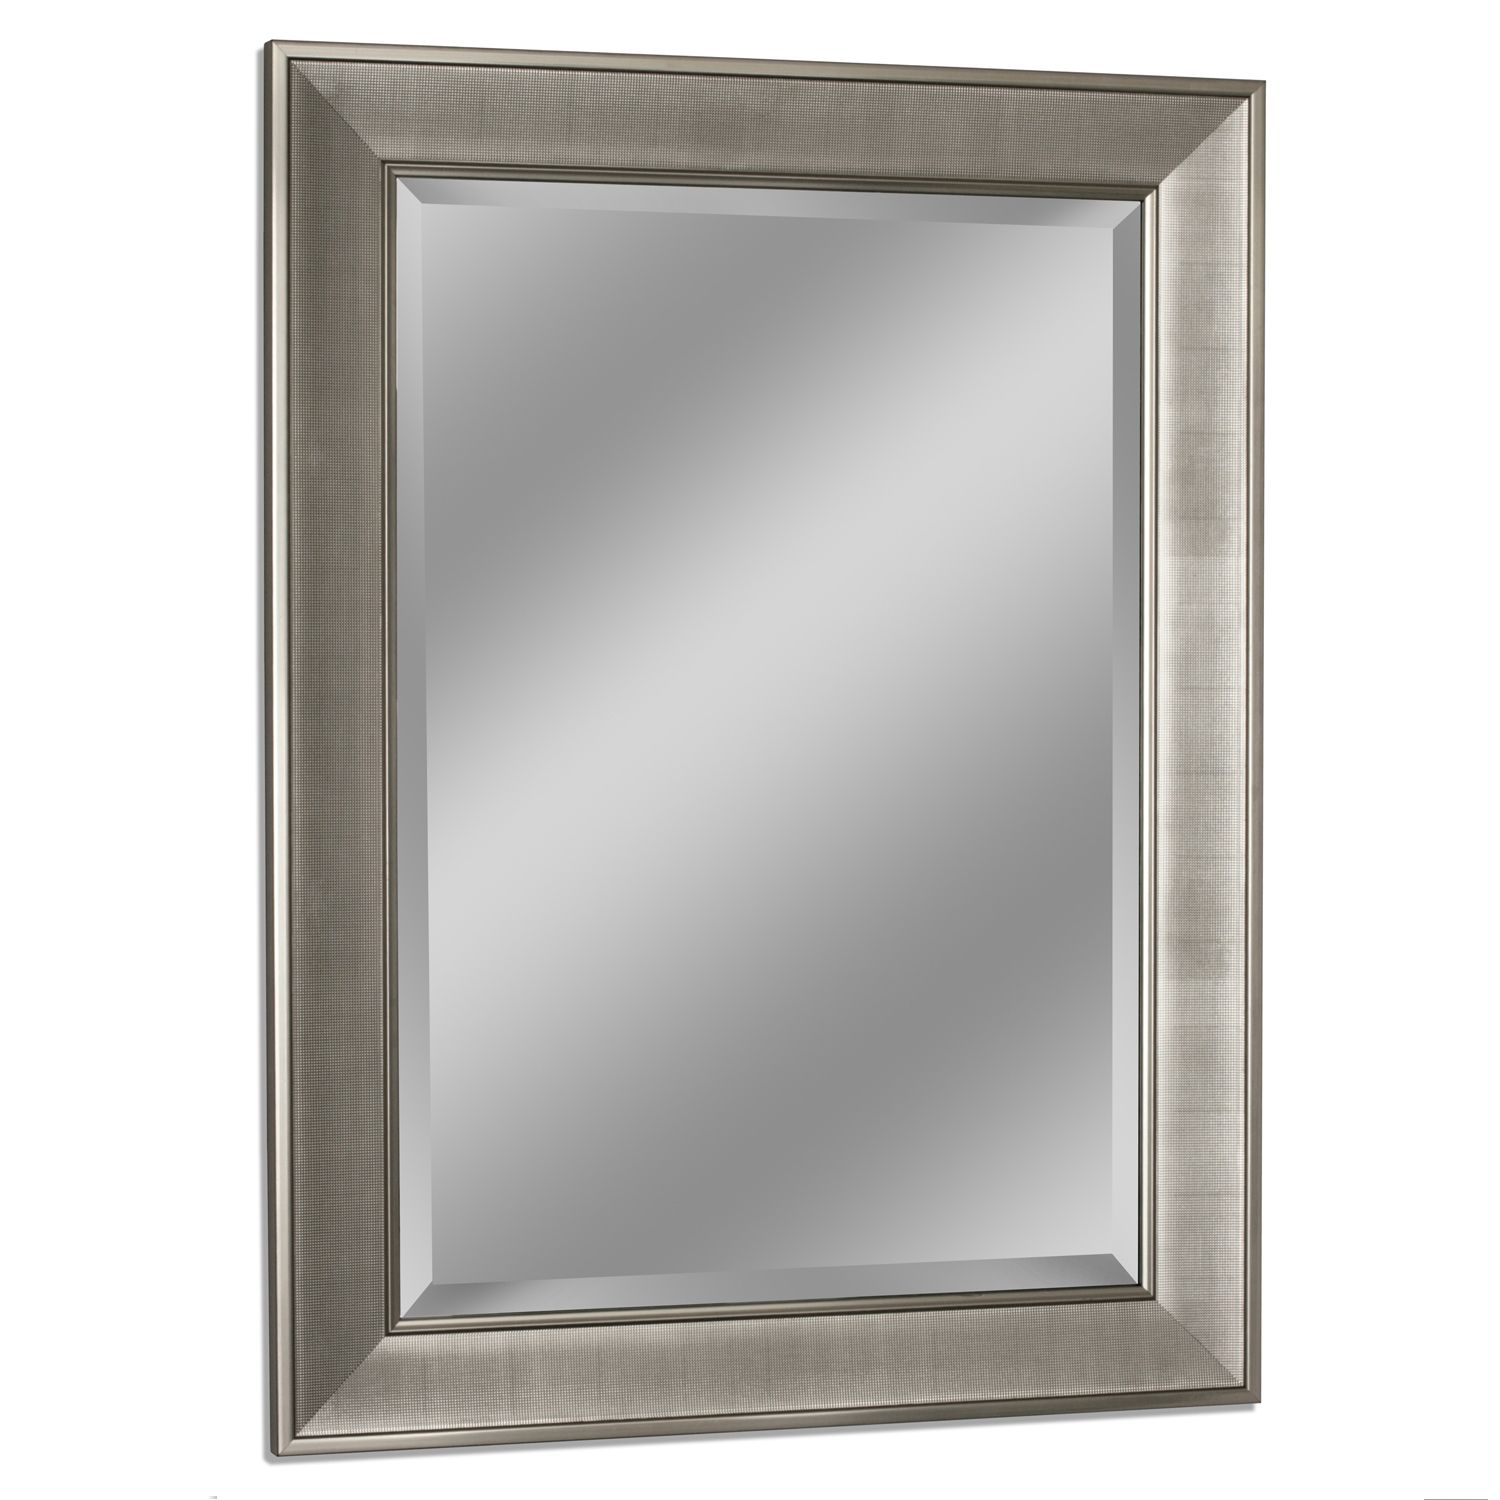 Image for Head West Brushed Finish Wall Mirror at Kohl's.